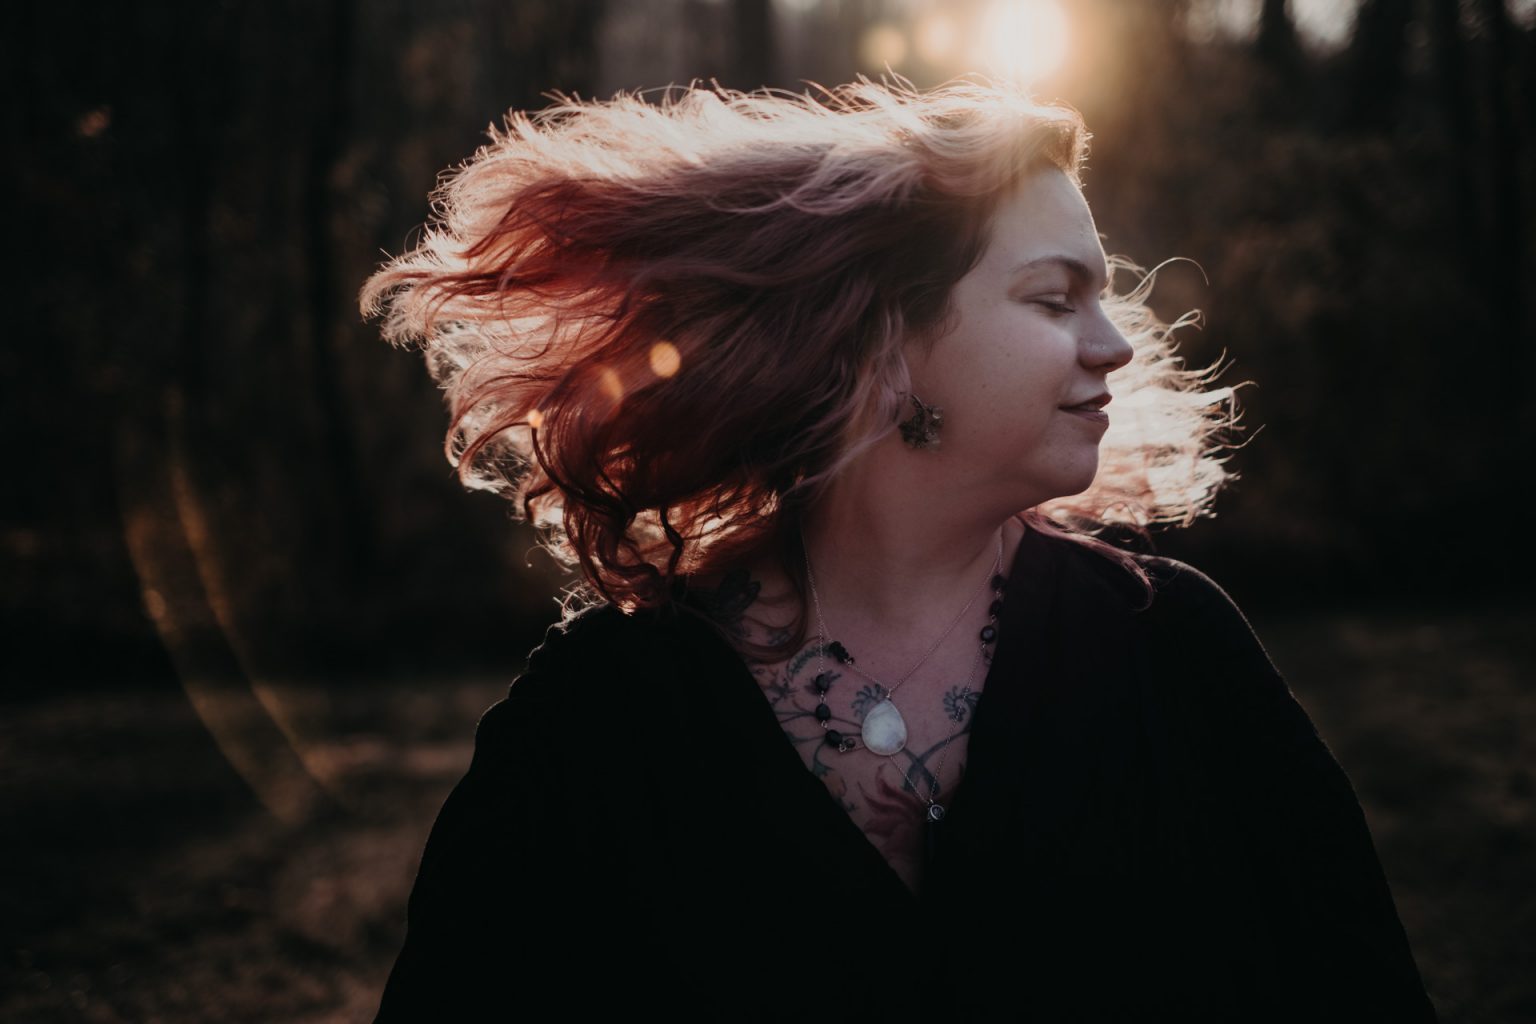  woman in woods pink hair in sunlight